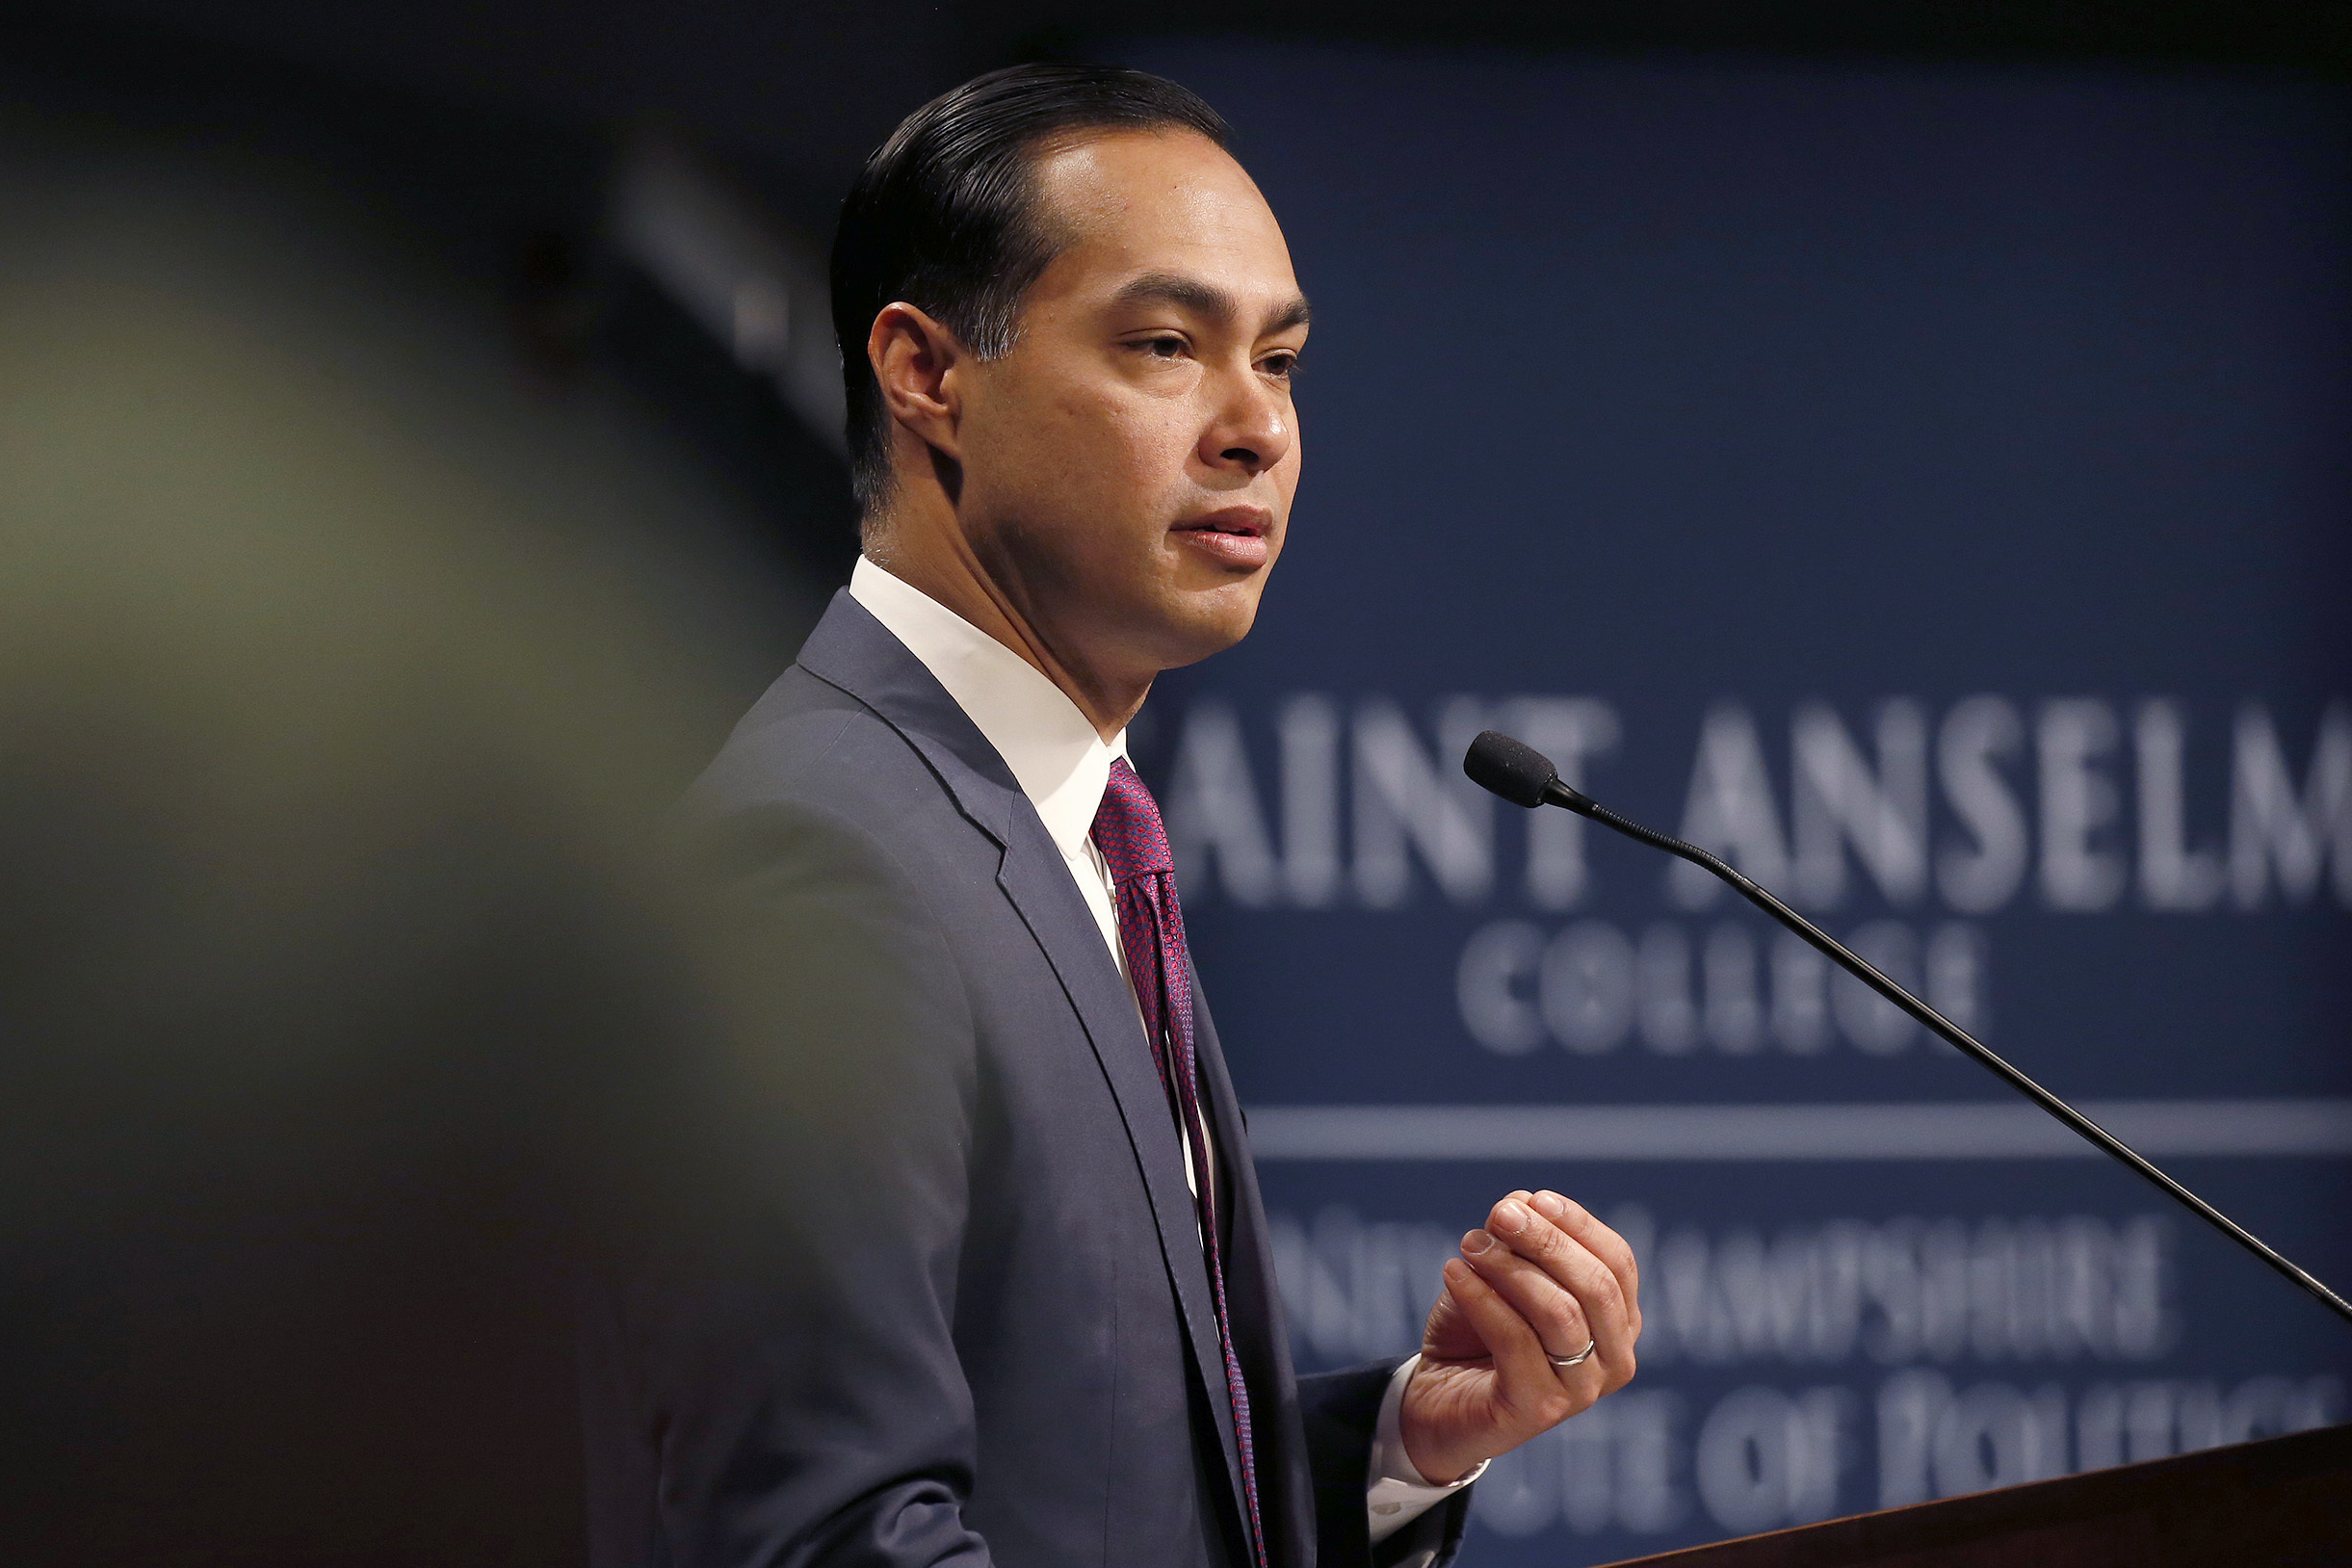 PHOTO: Julian Castro, former U.S. Secretary of Housing and Urban Development and candidate for the 2020 Democratic presidential nomination, speaks at Saint Anselm College, Jan. 16, 2019, in Manchester, N.H.